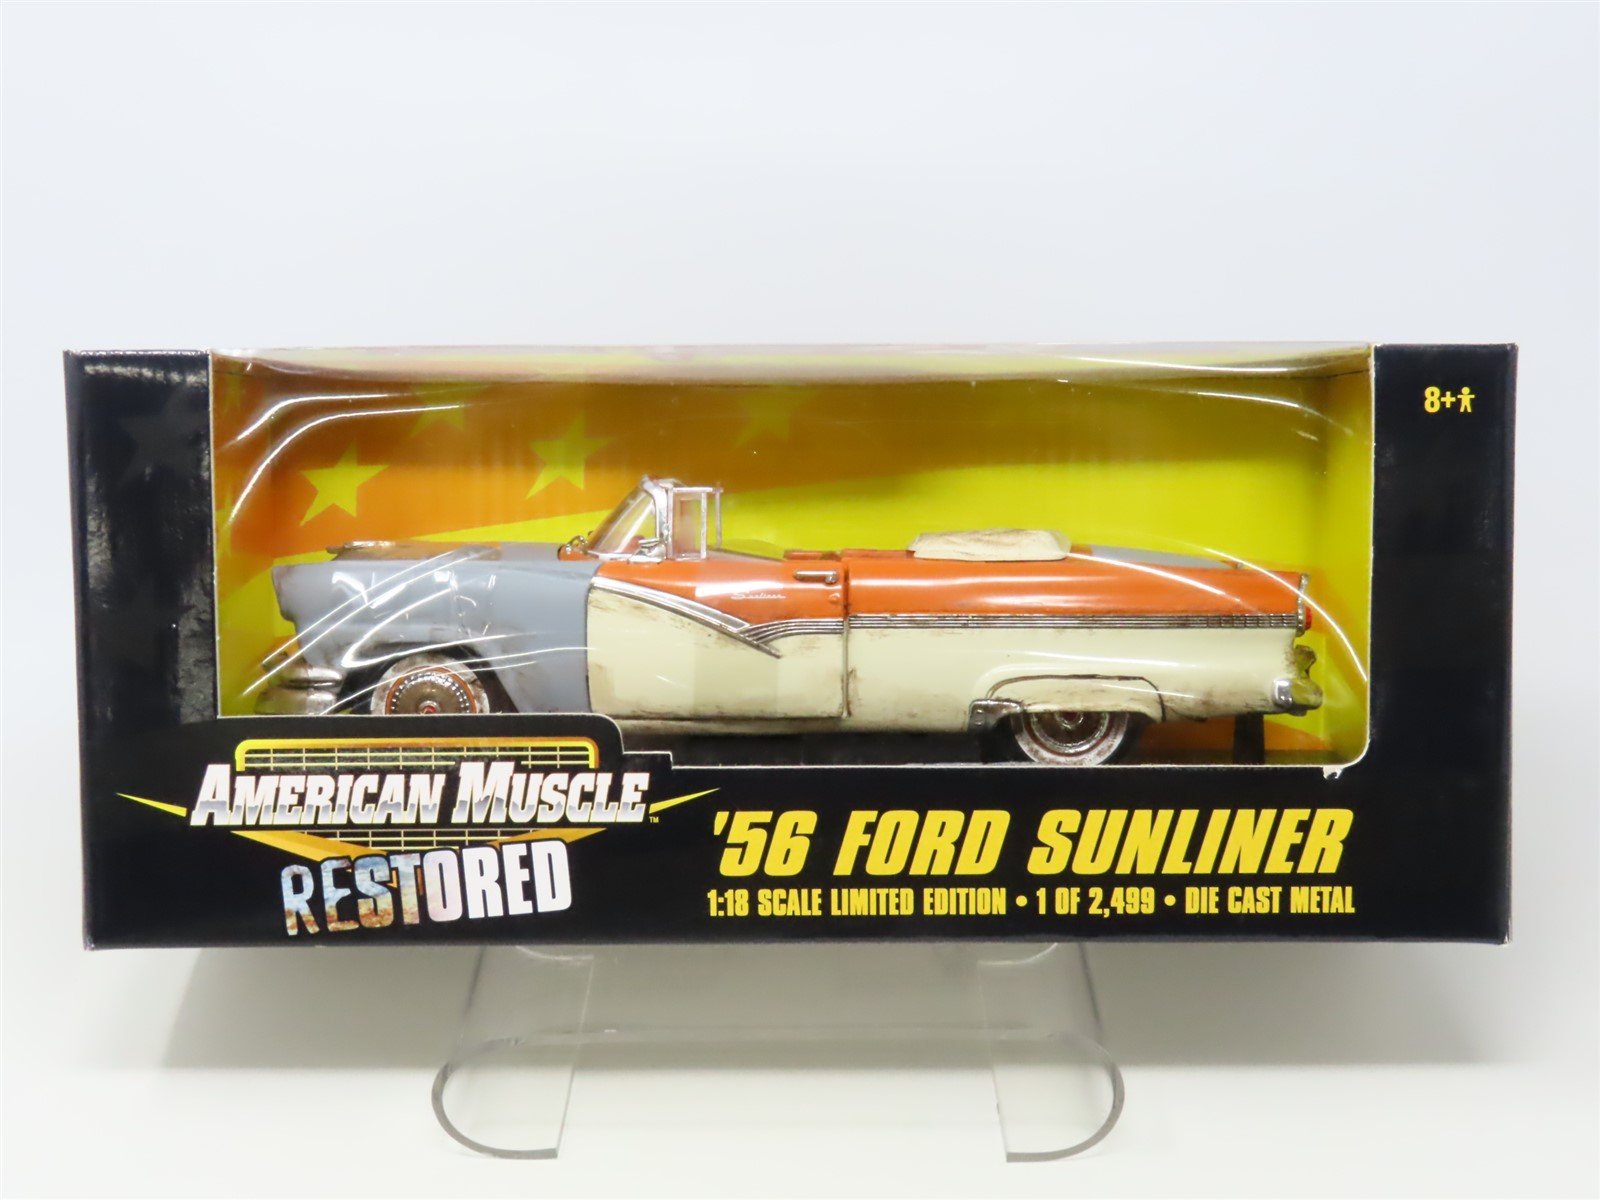 1:18 Scale ERTL American Muscle Restored Limited Edition 36398 '56 Ford Sunliner